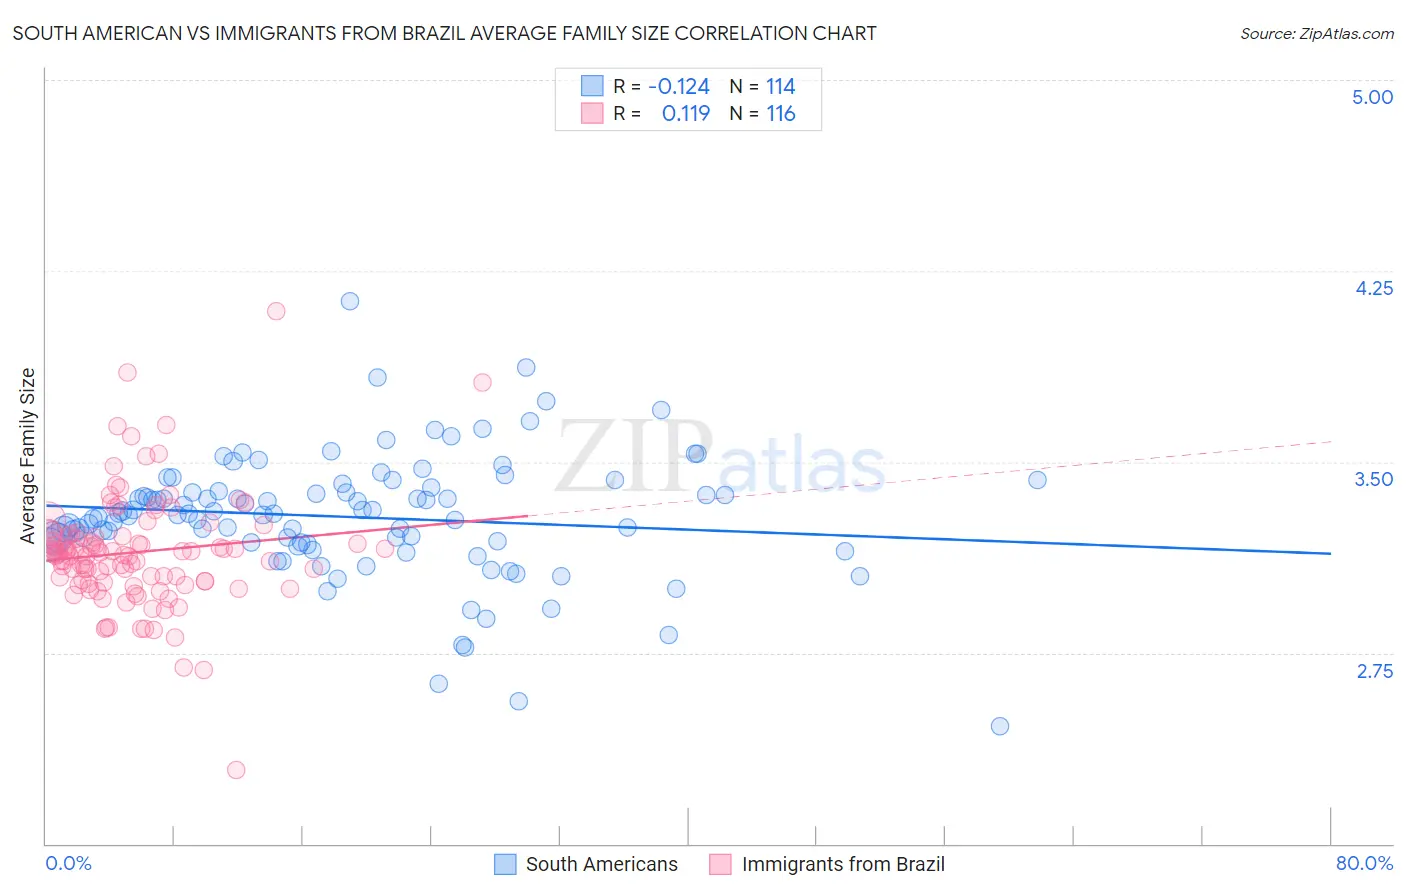 South American vs Immigrants from Brazil Average Family Size